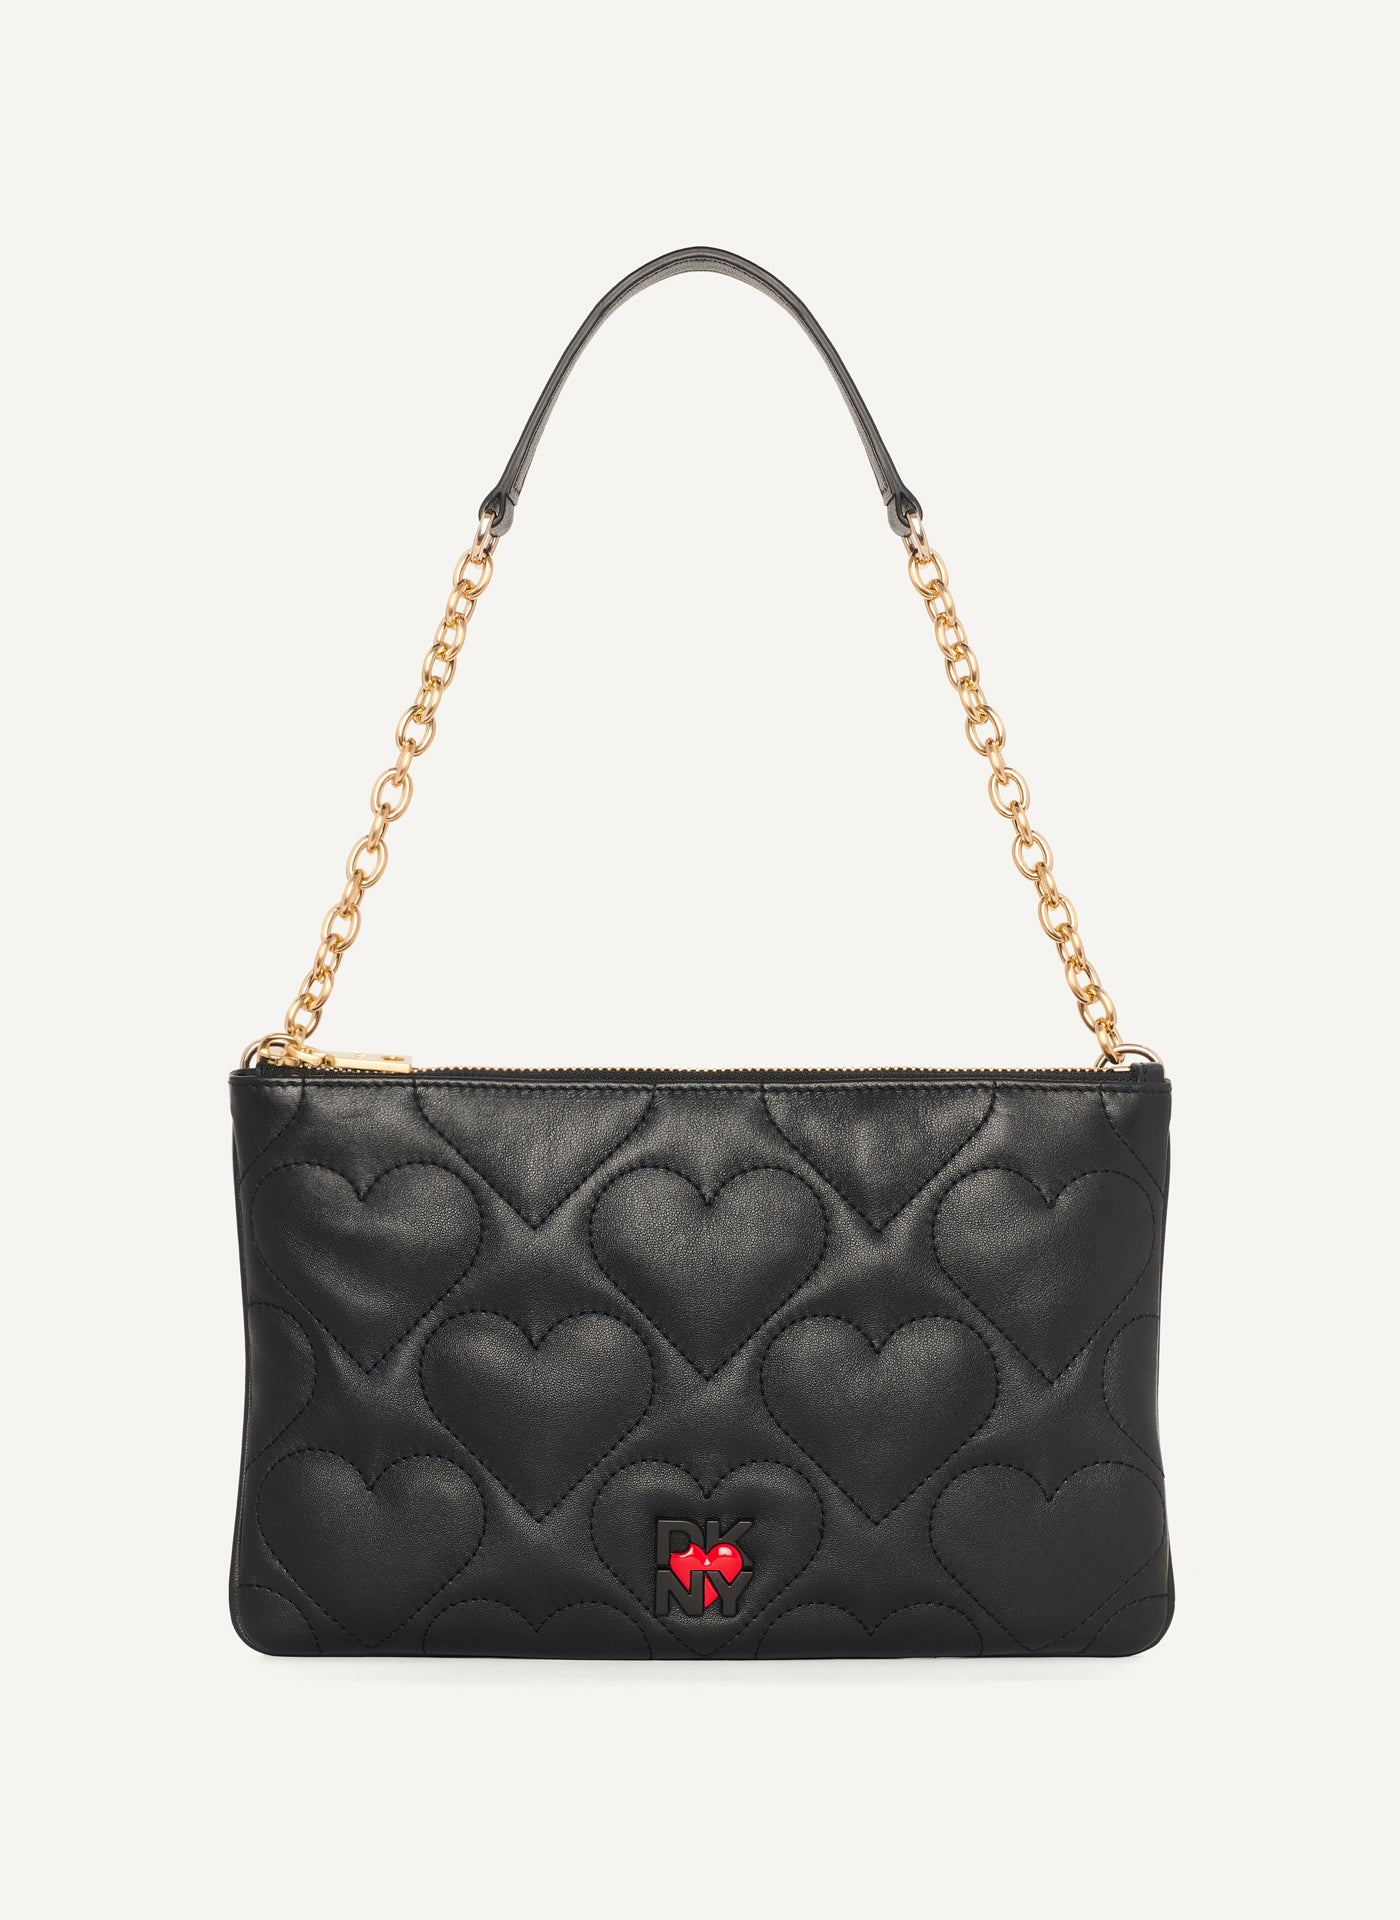 DKNY HEART OF NY QUILTED FLAT SHOULDER BAG,Black